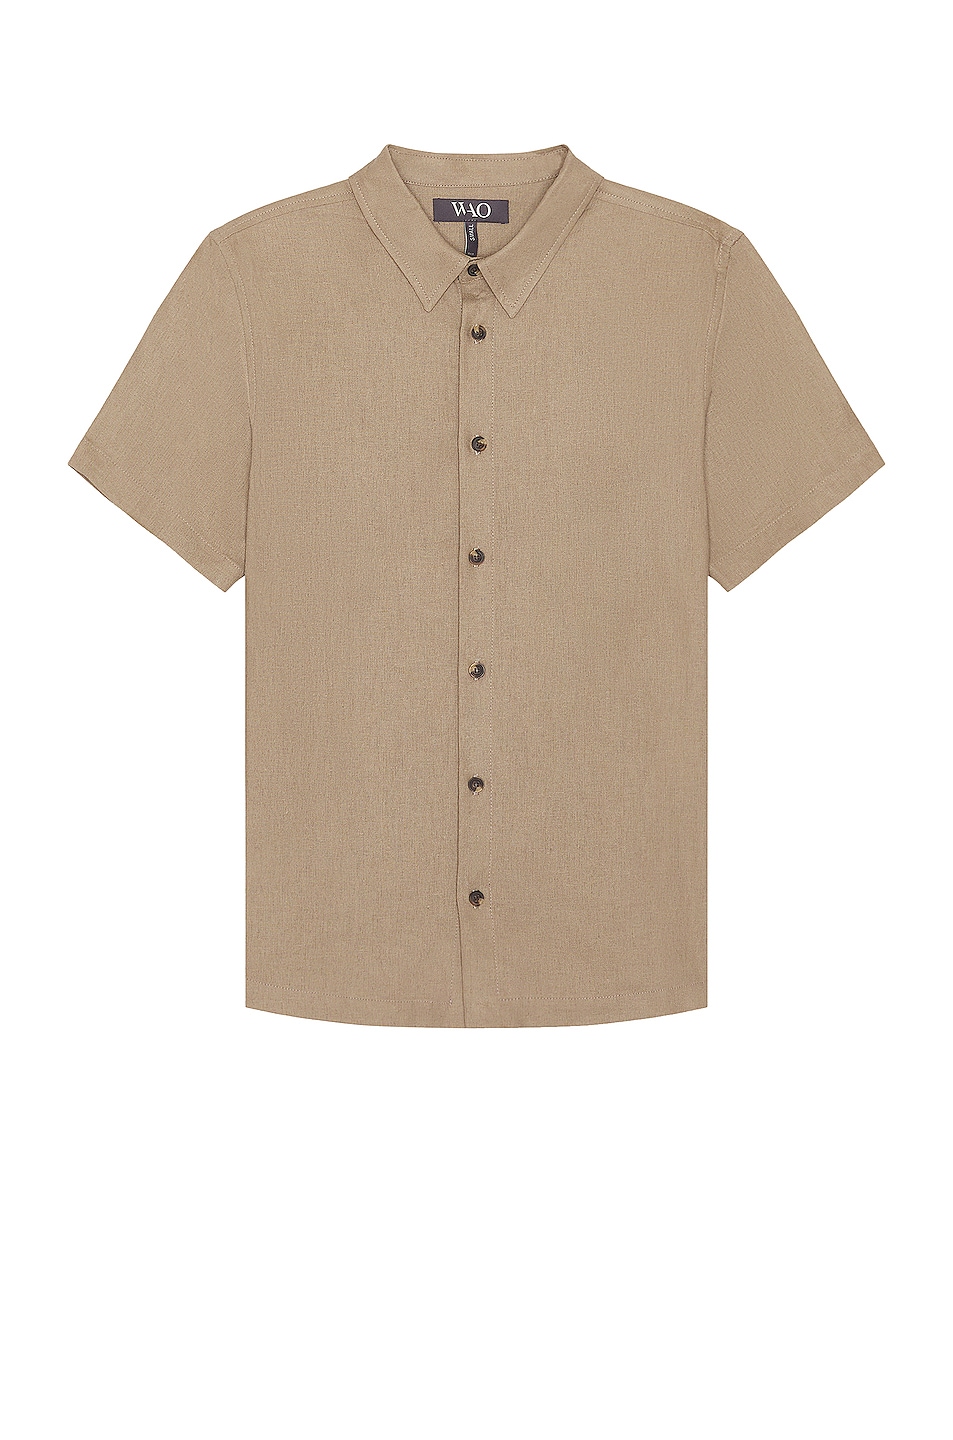 The Short Sleeve Shirt in Olive